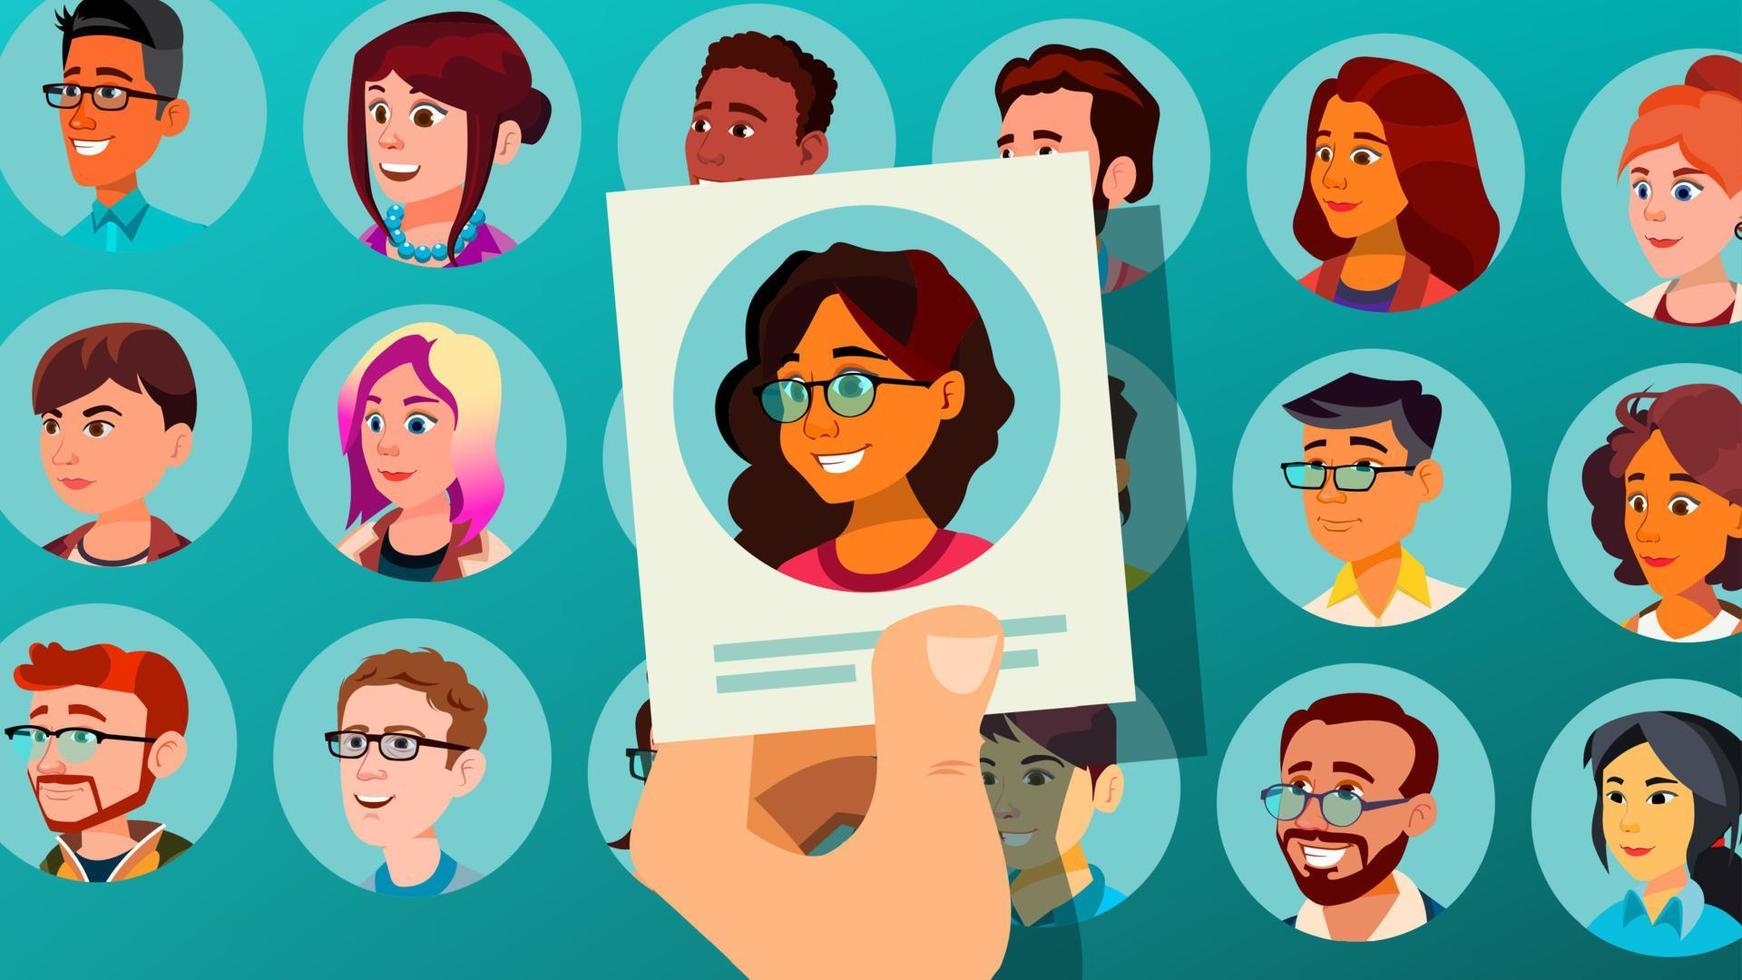 Human Recruitment Vector. Woman. Human Recruitment. Selected Group Of People. Pick From The Crowd. Cartoon Illustration vector